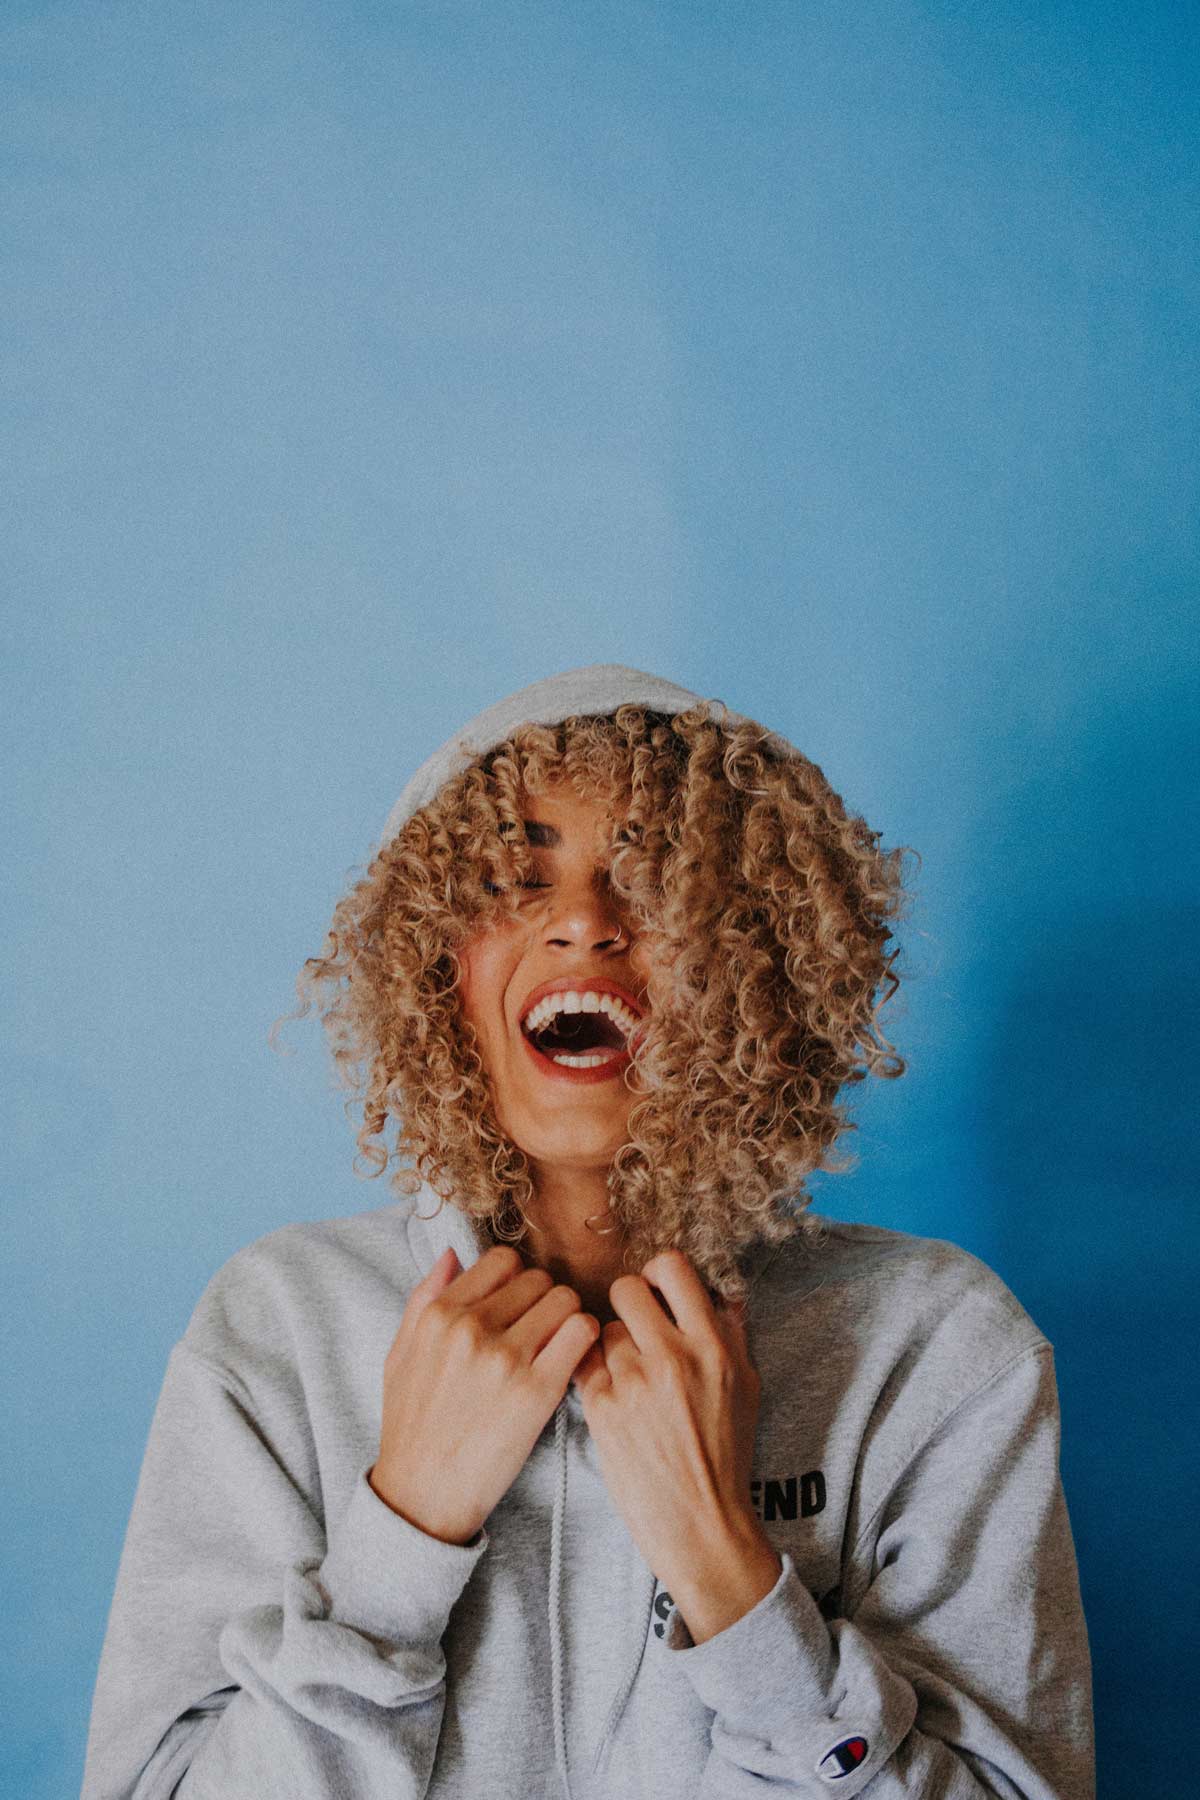 curly haired woman laughing wearing a hoodie